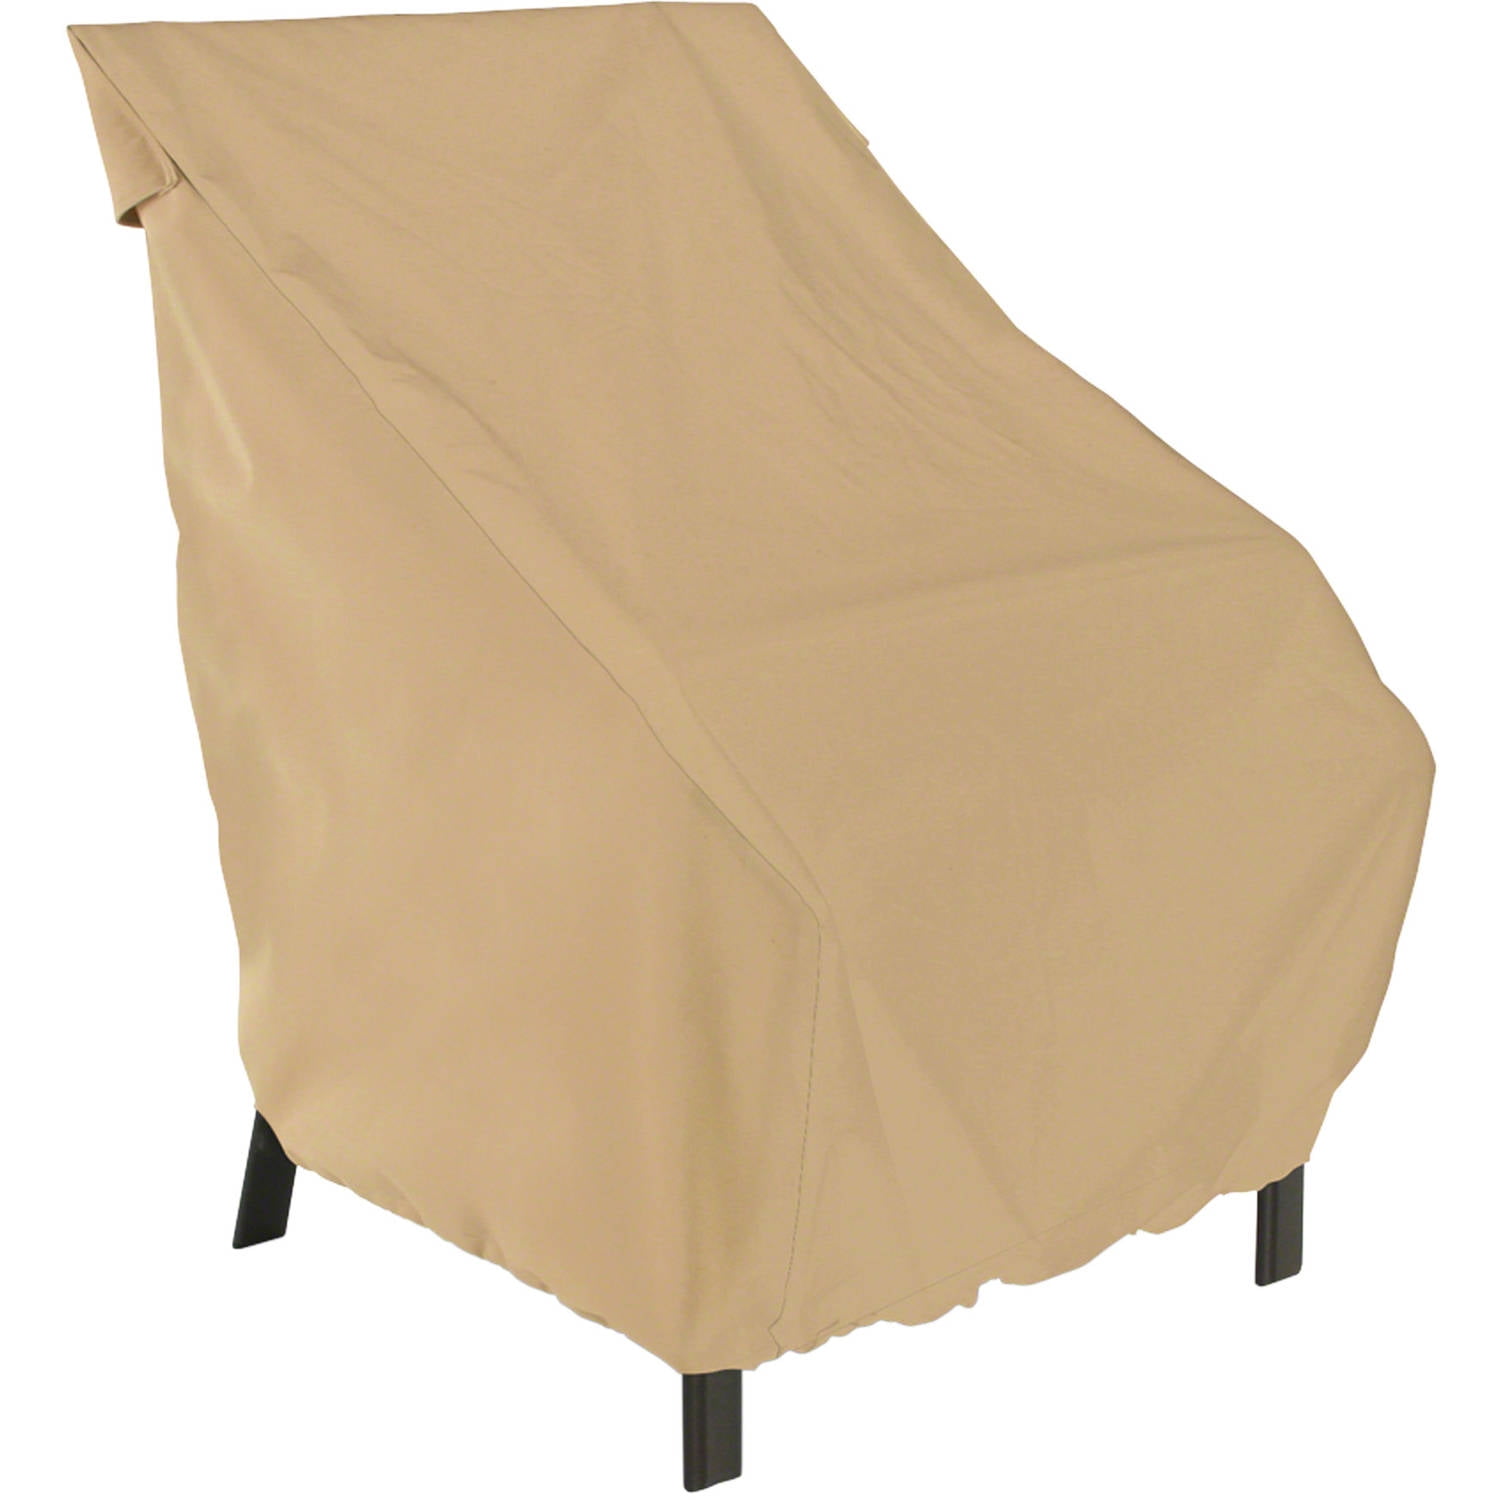 Durable and Water Resistant Outdoor Chair Cover C41 Patio Chair Cover 